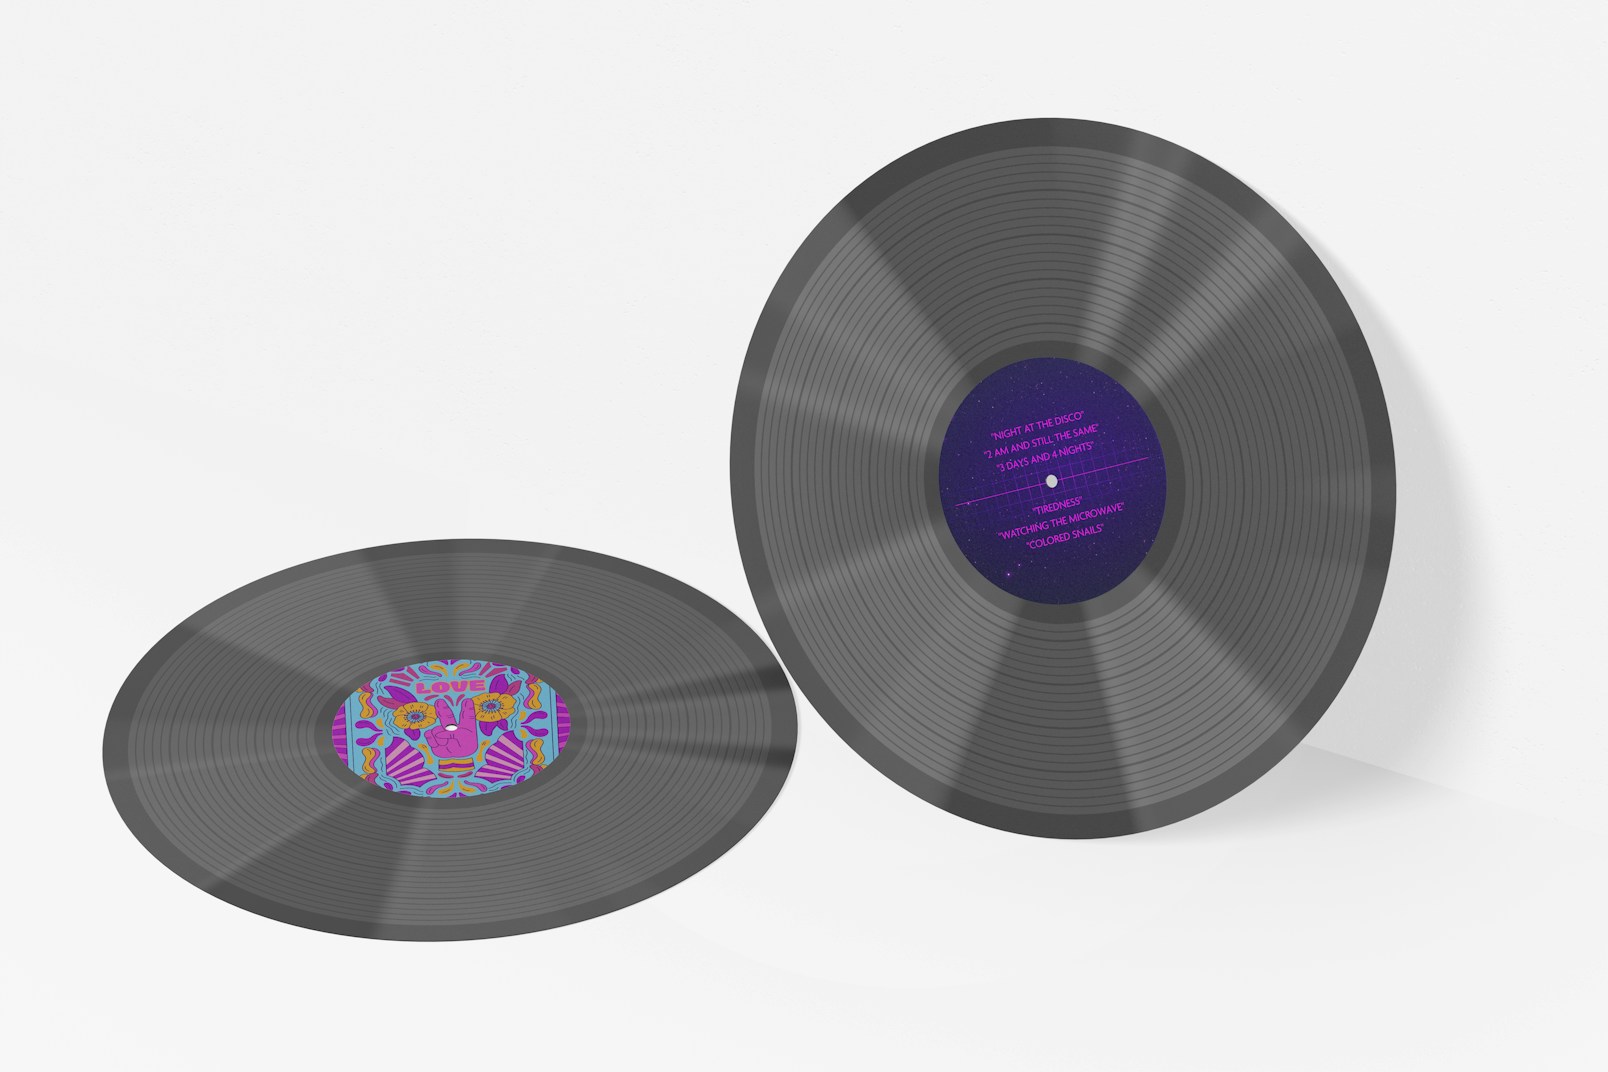 Vinyl Disc Mockup, Dropped and Leaned